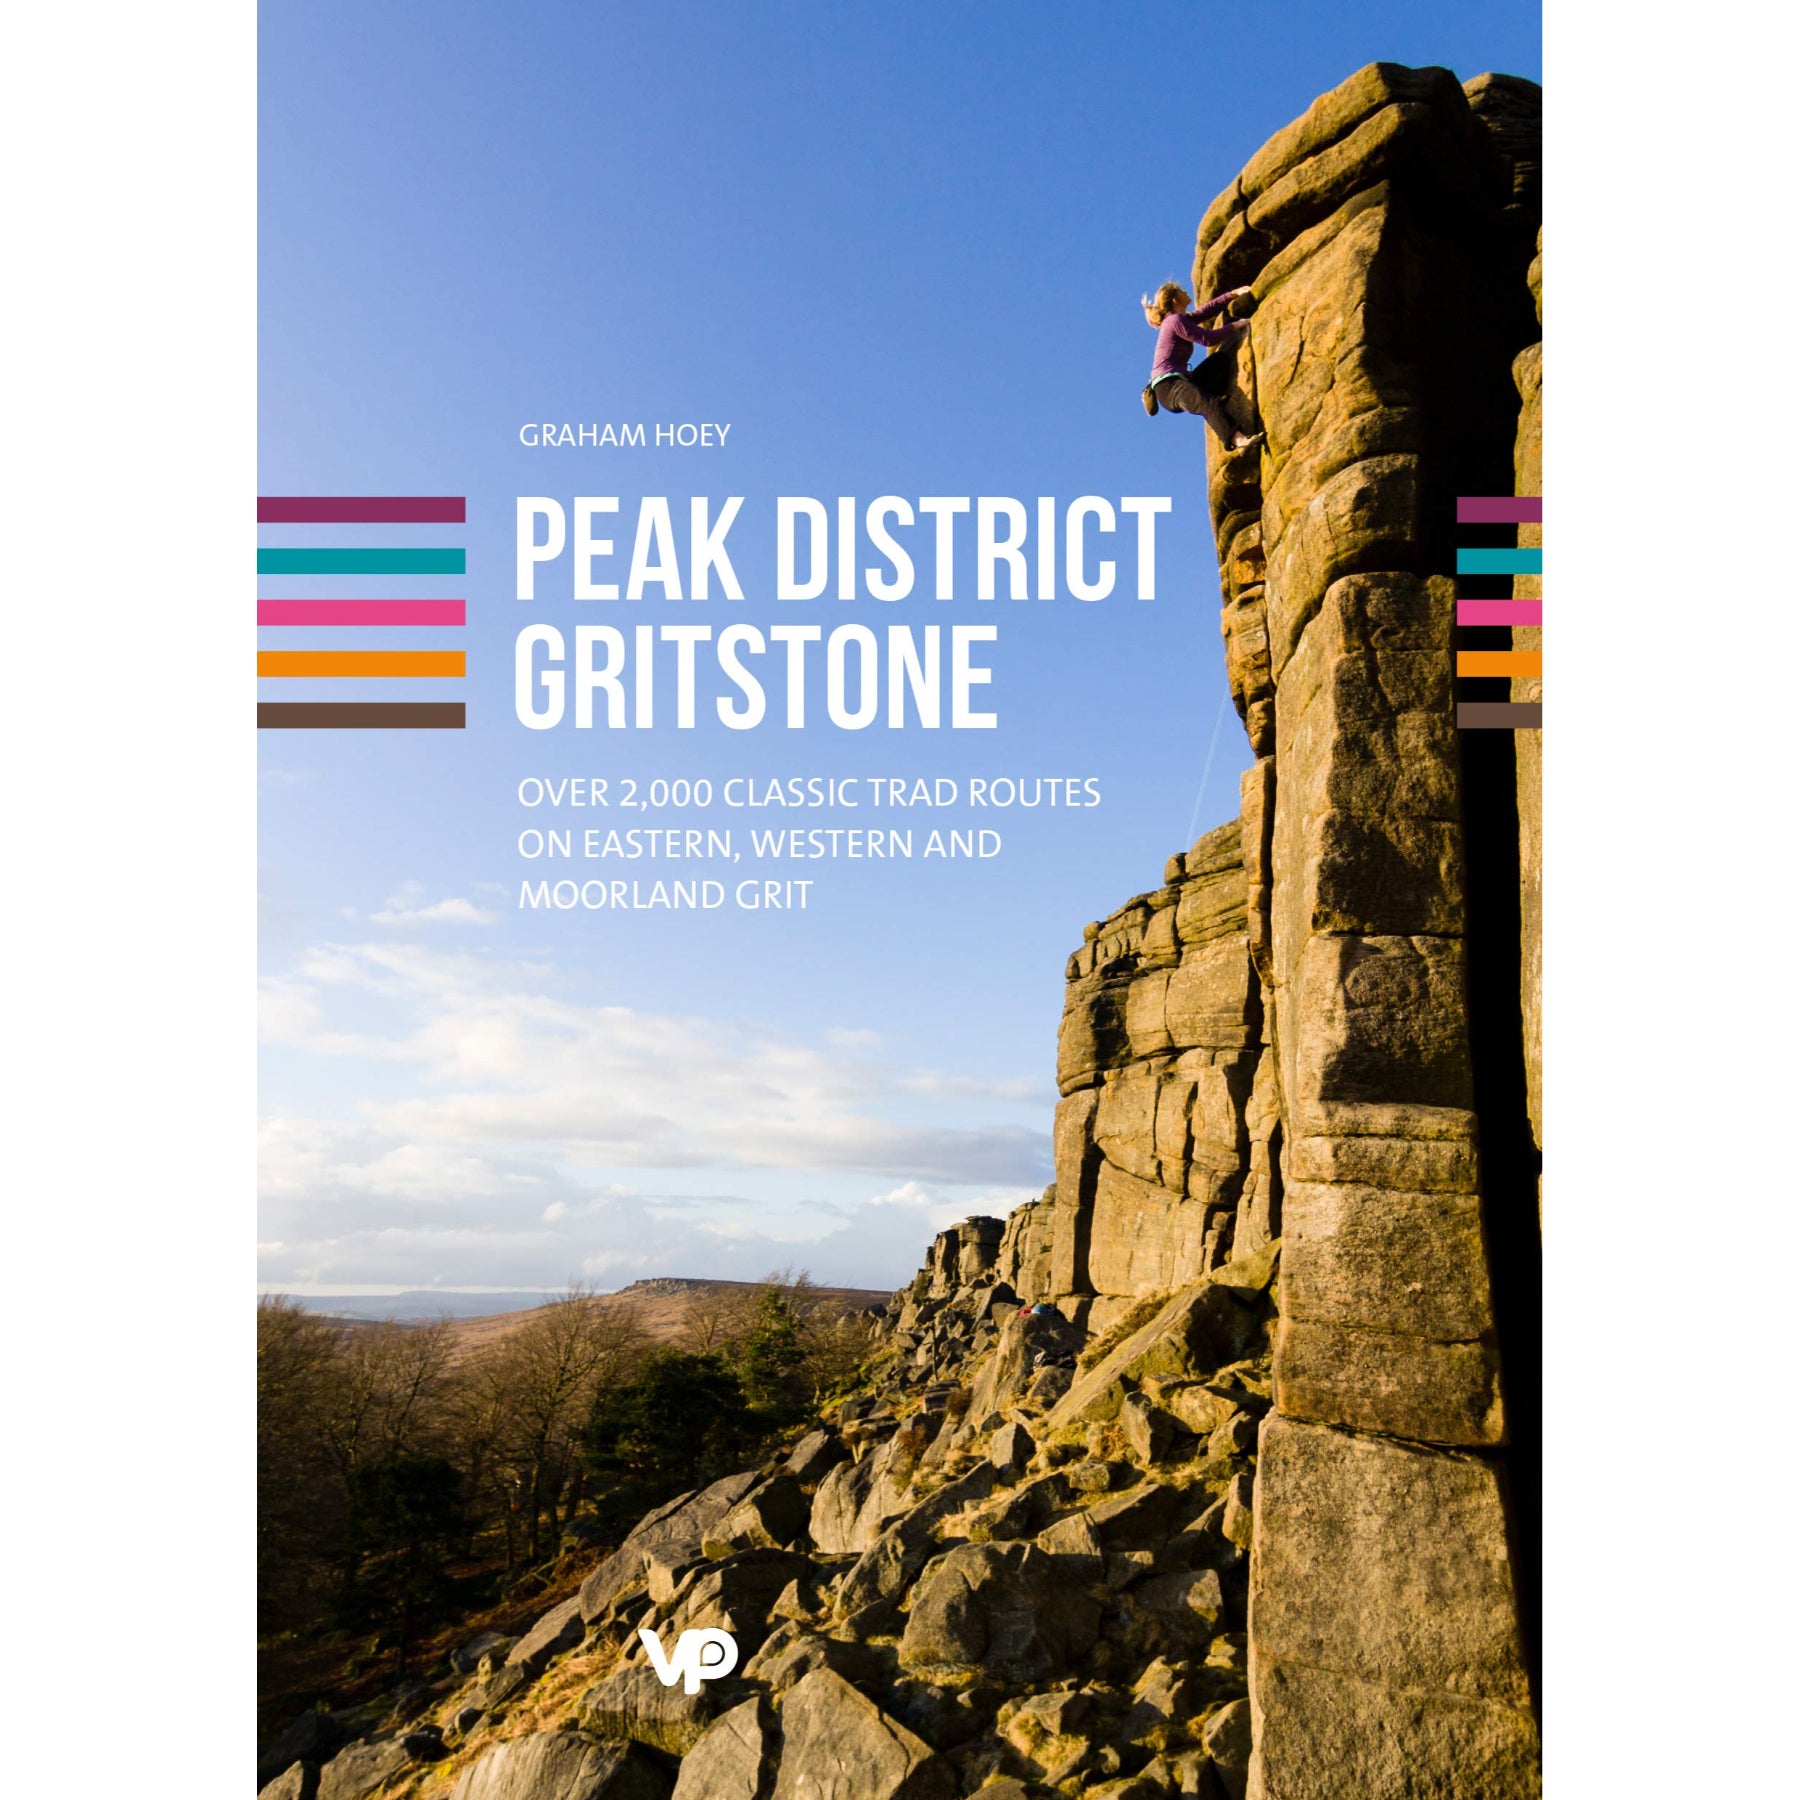 Peak District Gritstone Guide Book Cover 2021